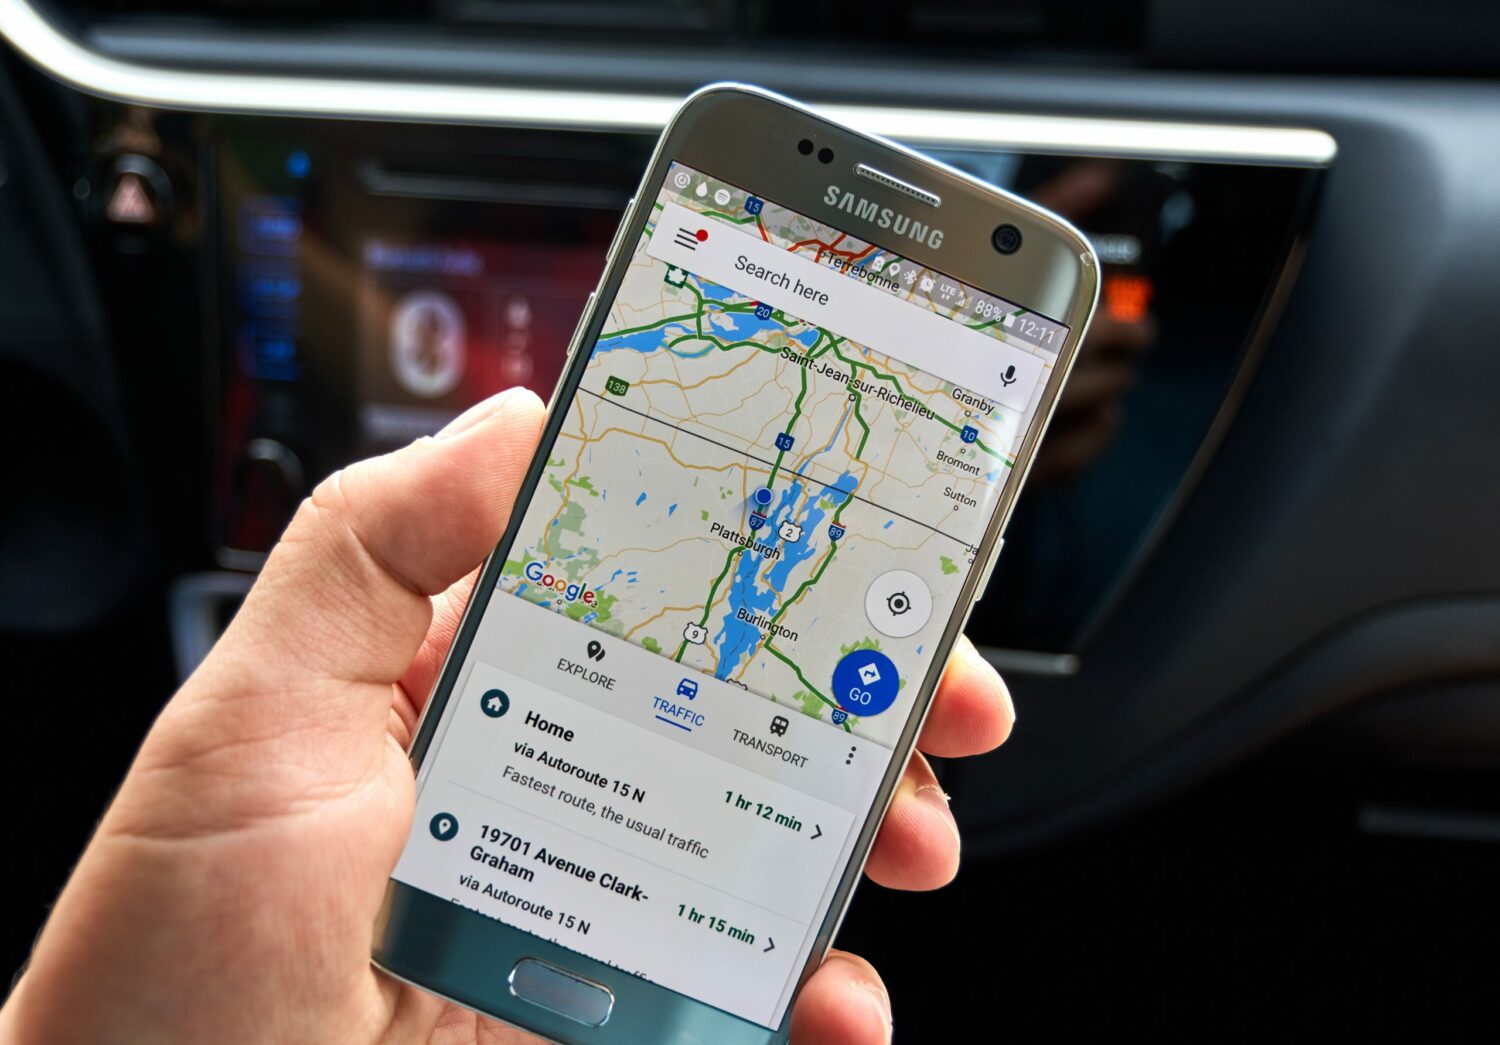 Google maps has expanded local search functionality